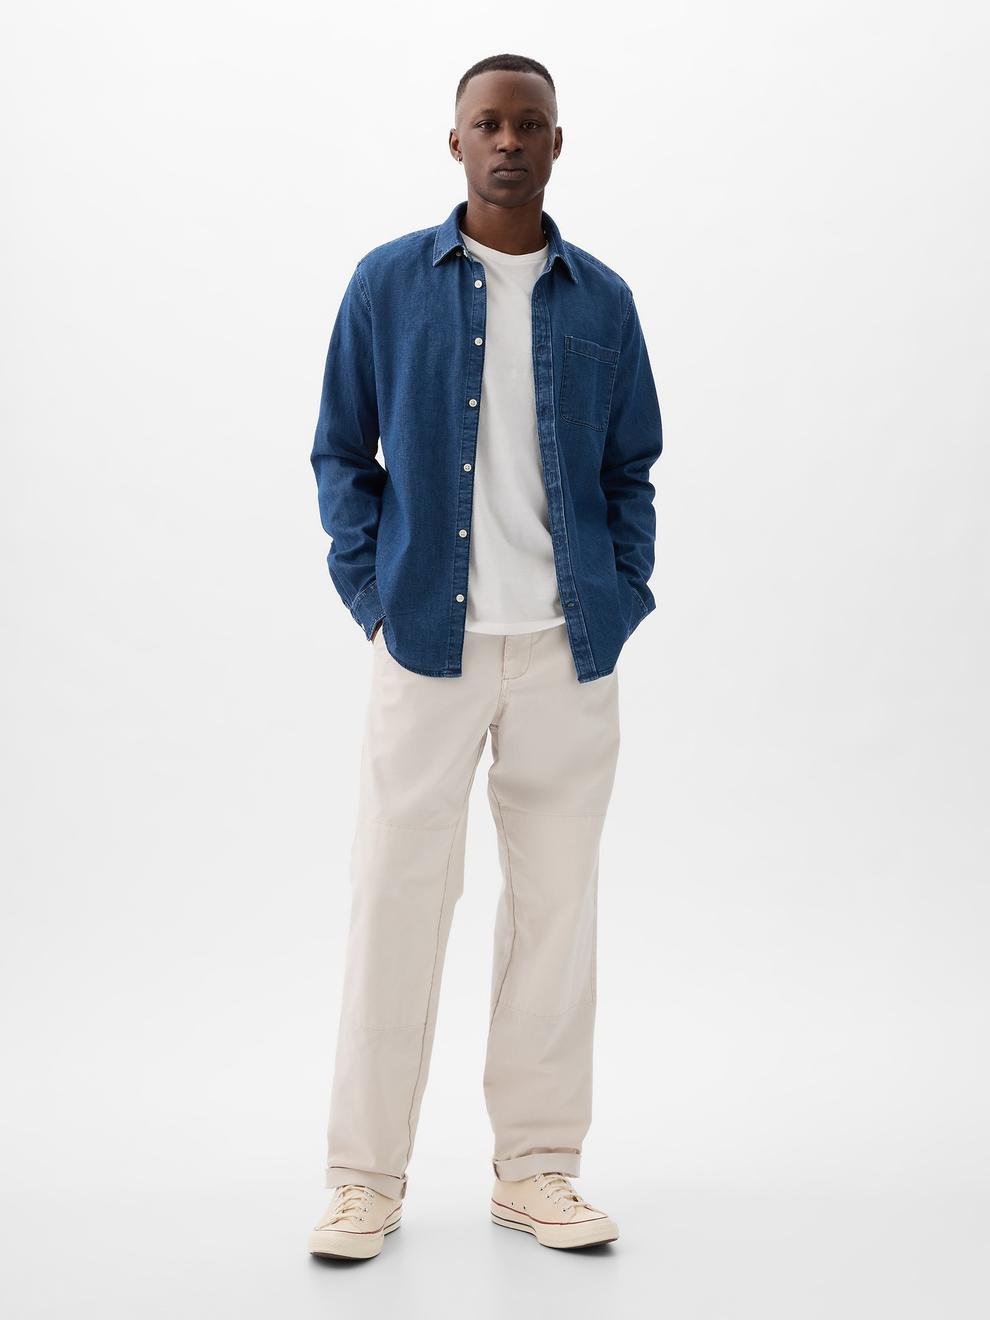 Carpenter Pants offers at 179 Dhs in Gap